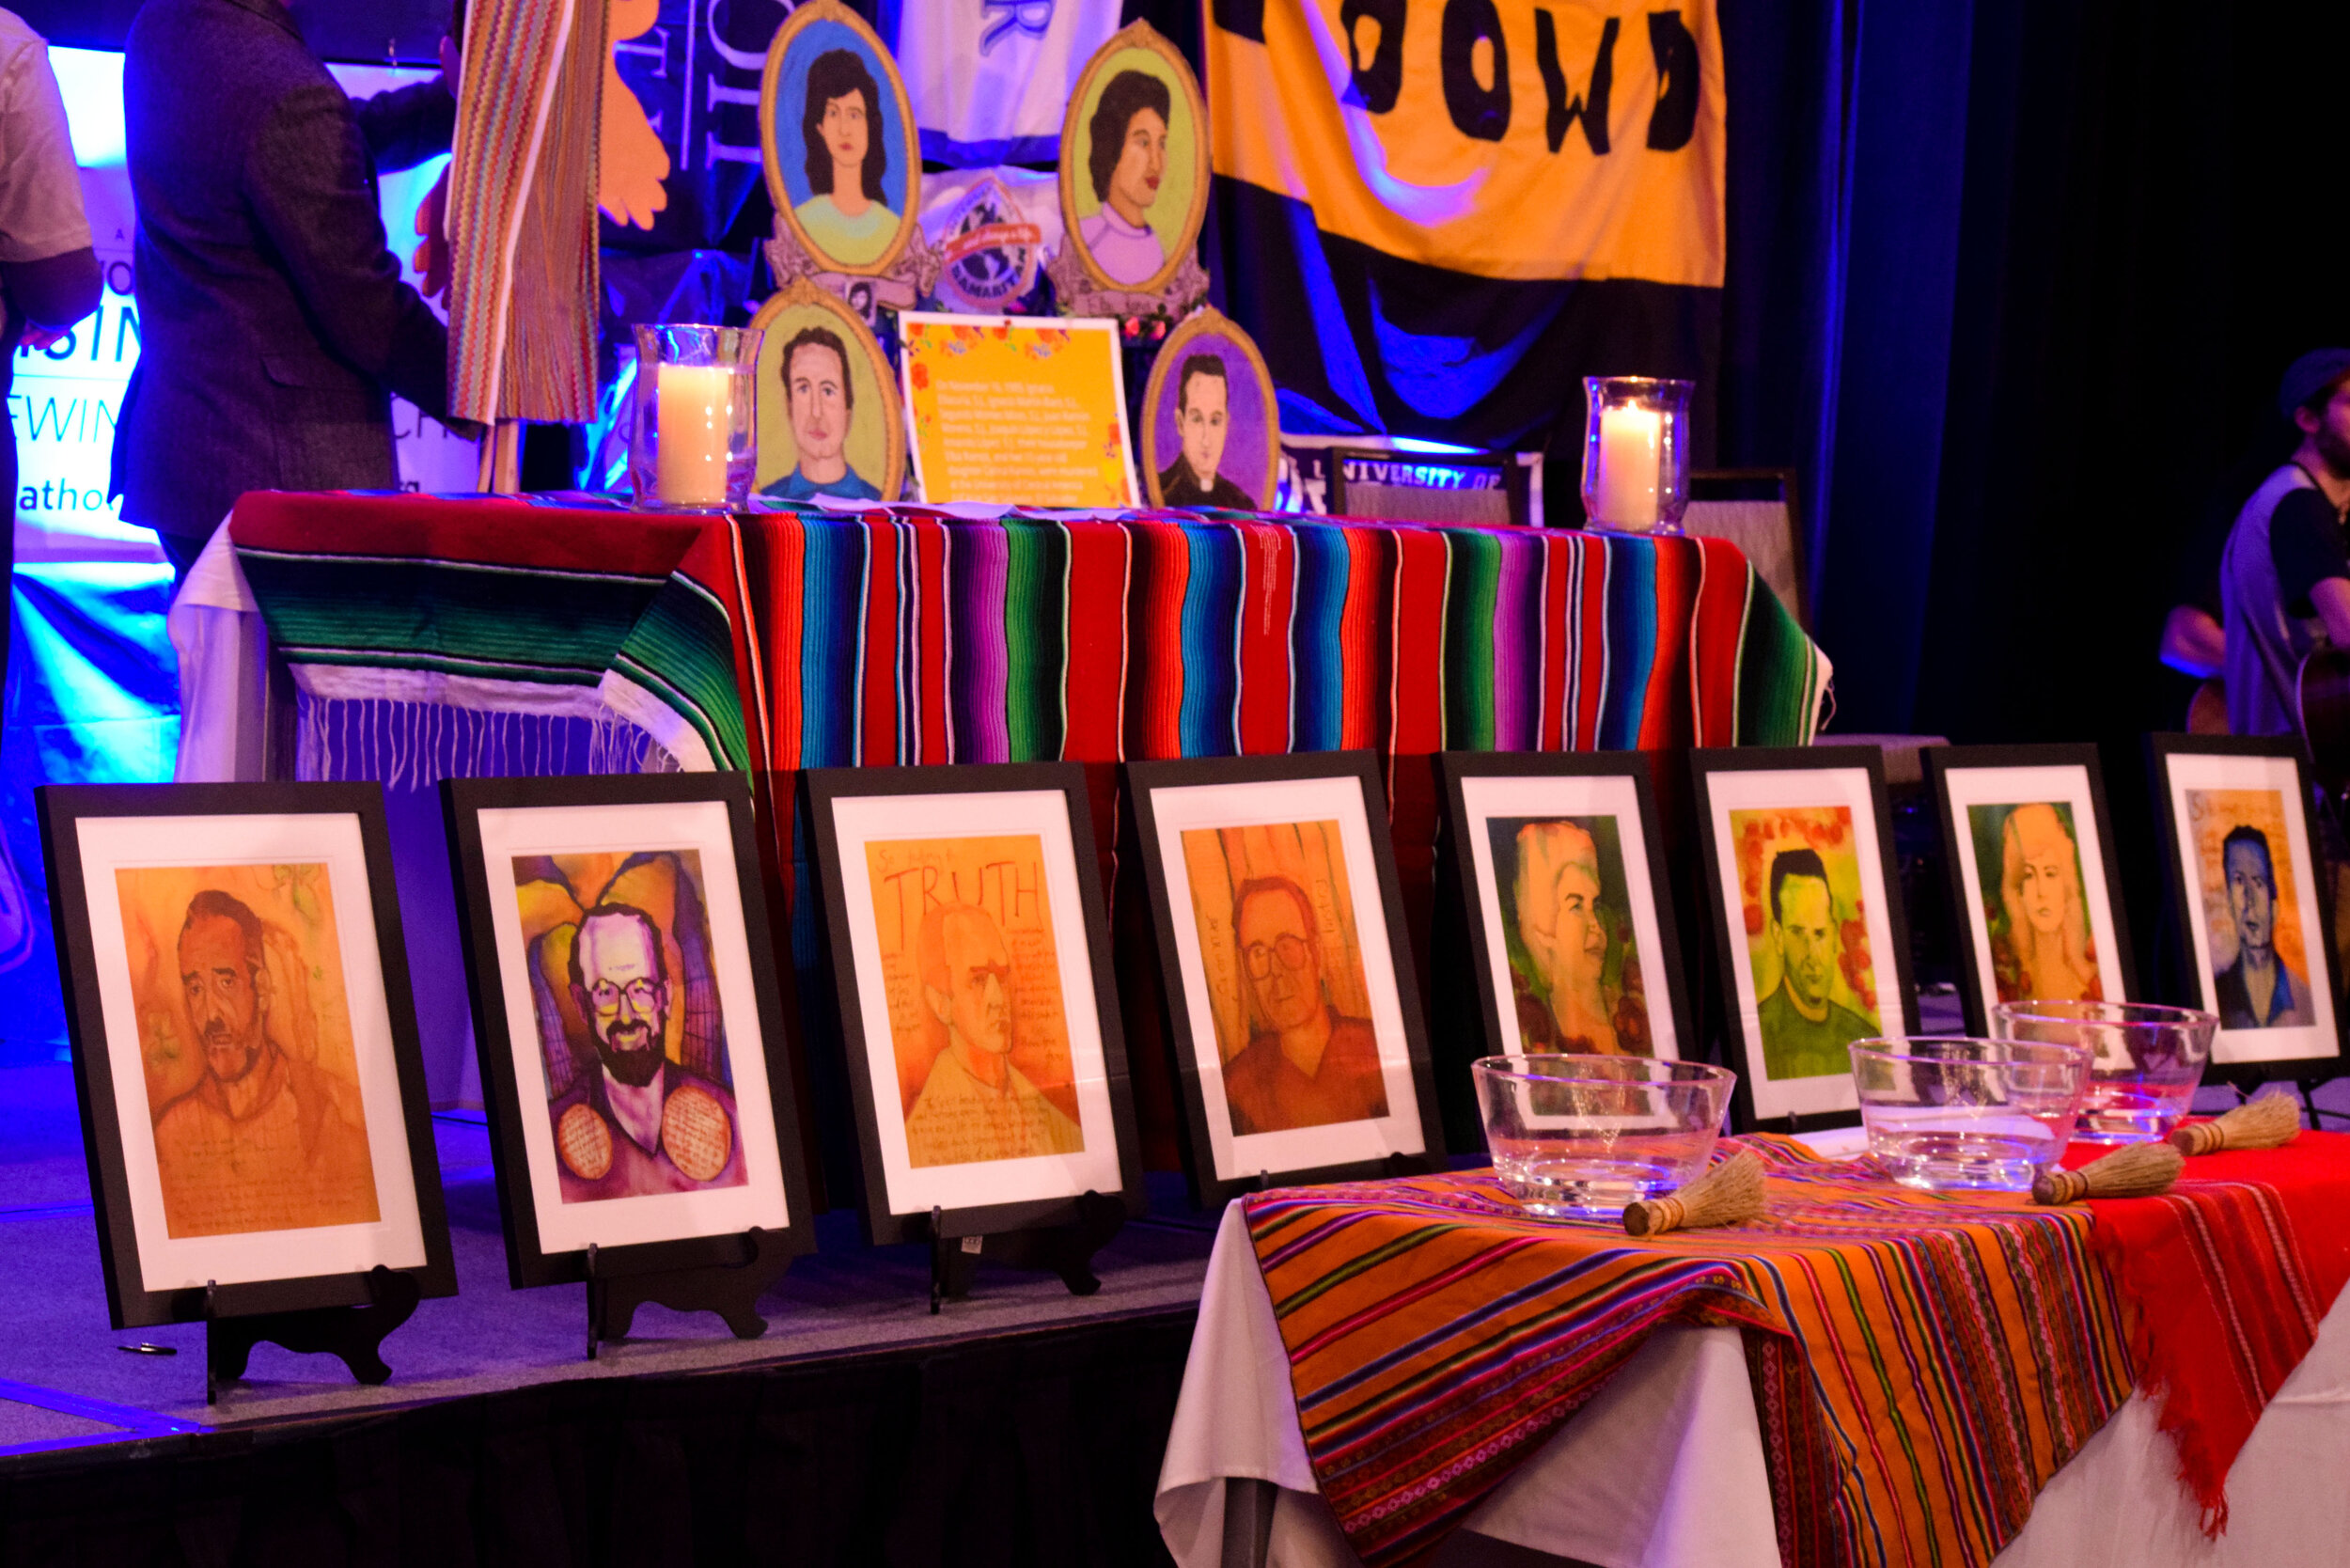  The altar at the 2019 Ignatian Family Teach-In for Justice in Washington, D.C., commemorates the El Salvadoran martyrs of 1989 at the Sunday mass. During the Salvadoran Civil War on Nov. 16, 1989, Salvadoran Army soldiers killed six Jesuits and two 